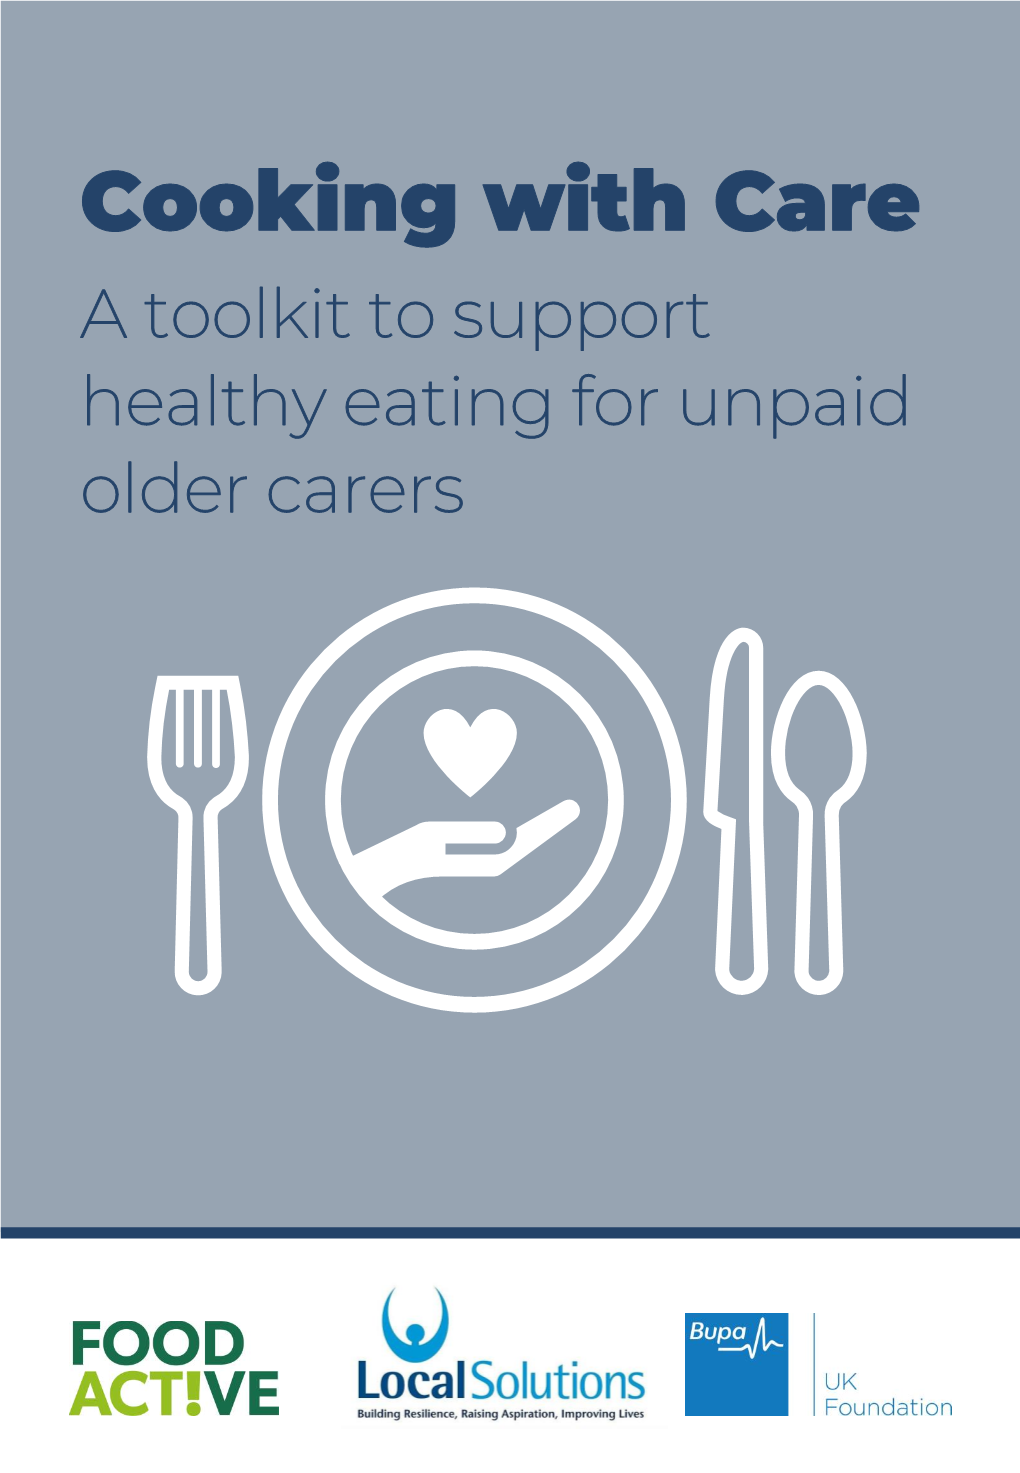 Cooking with Care a Toolkit to Support Healthy Eating for Unpaid Older Carers Introduction